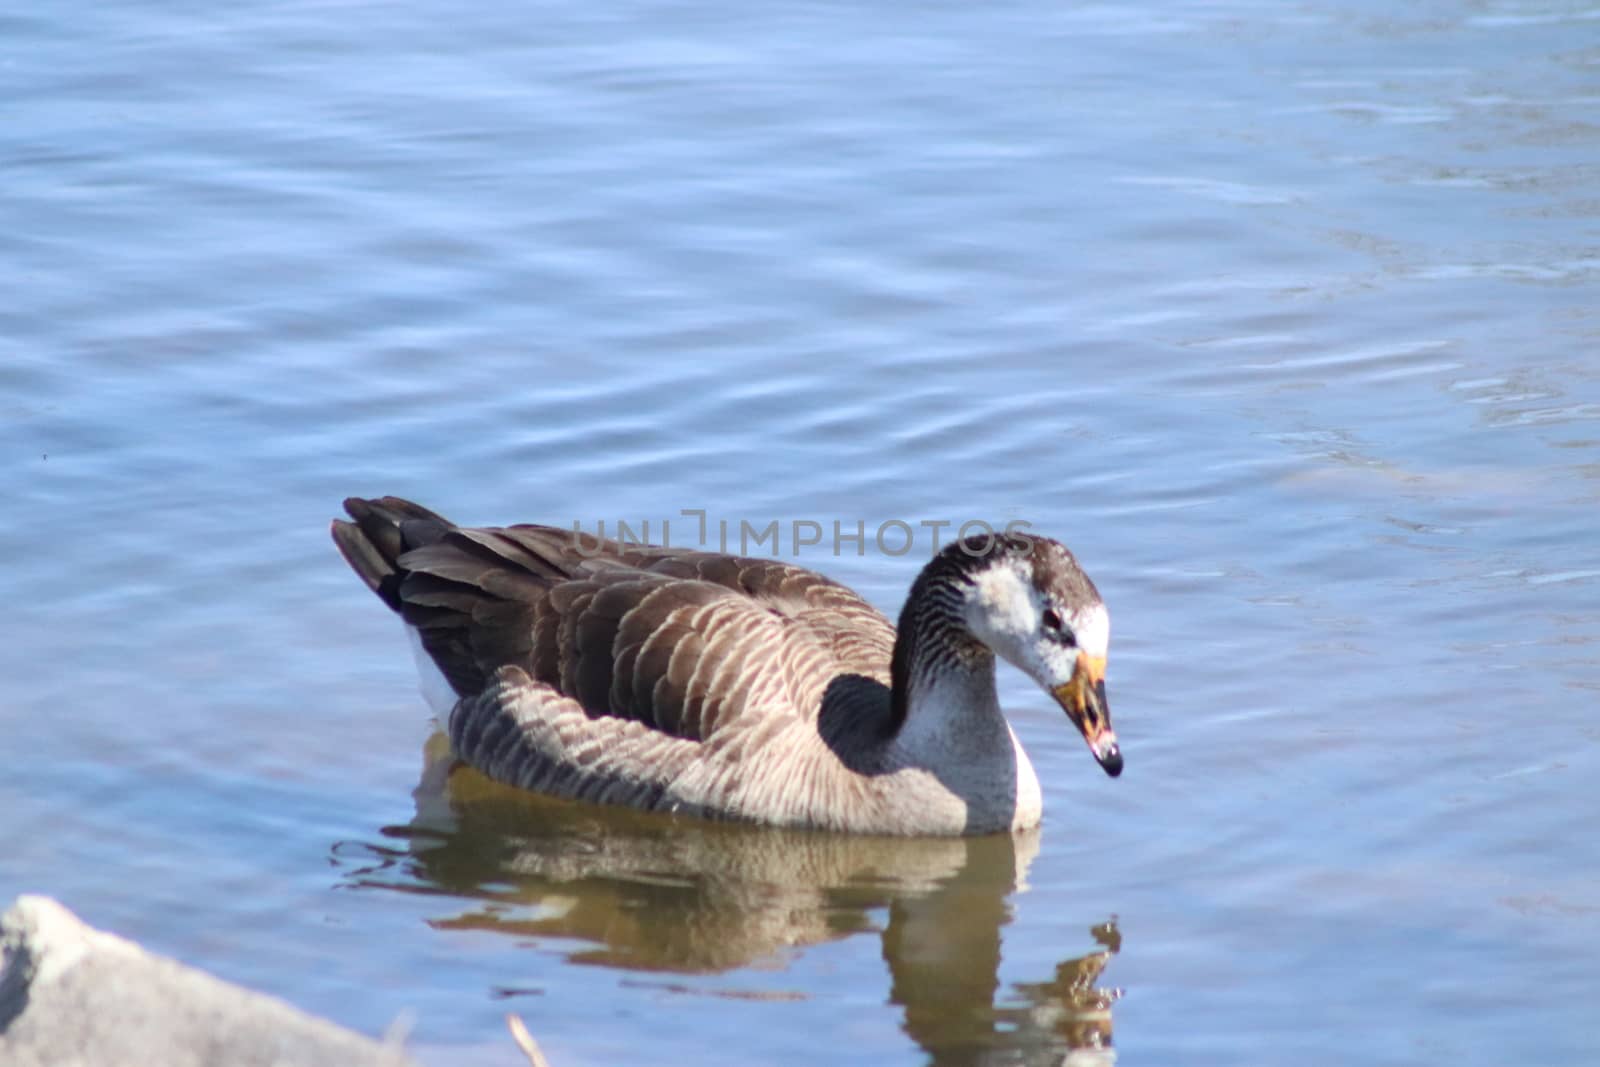 A goose swimming in water next to a body of water. High quality photo